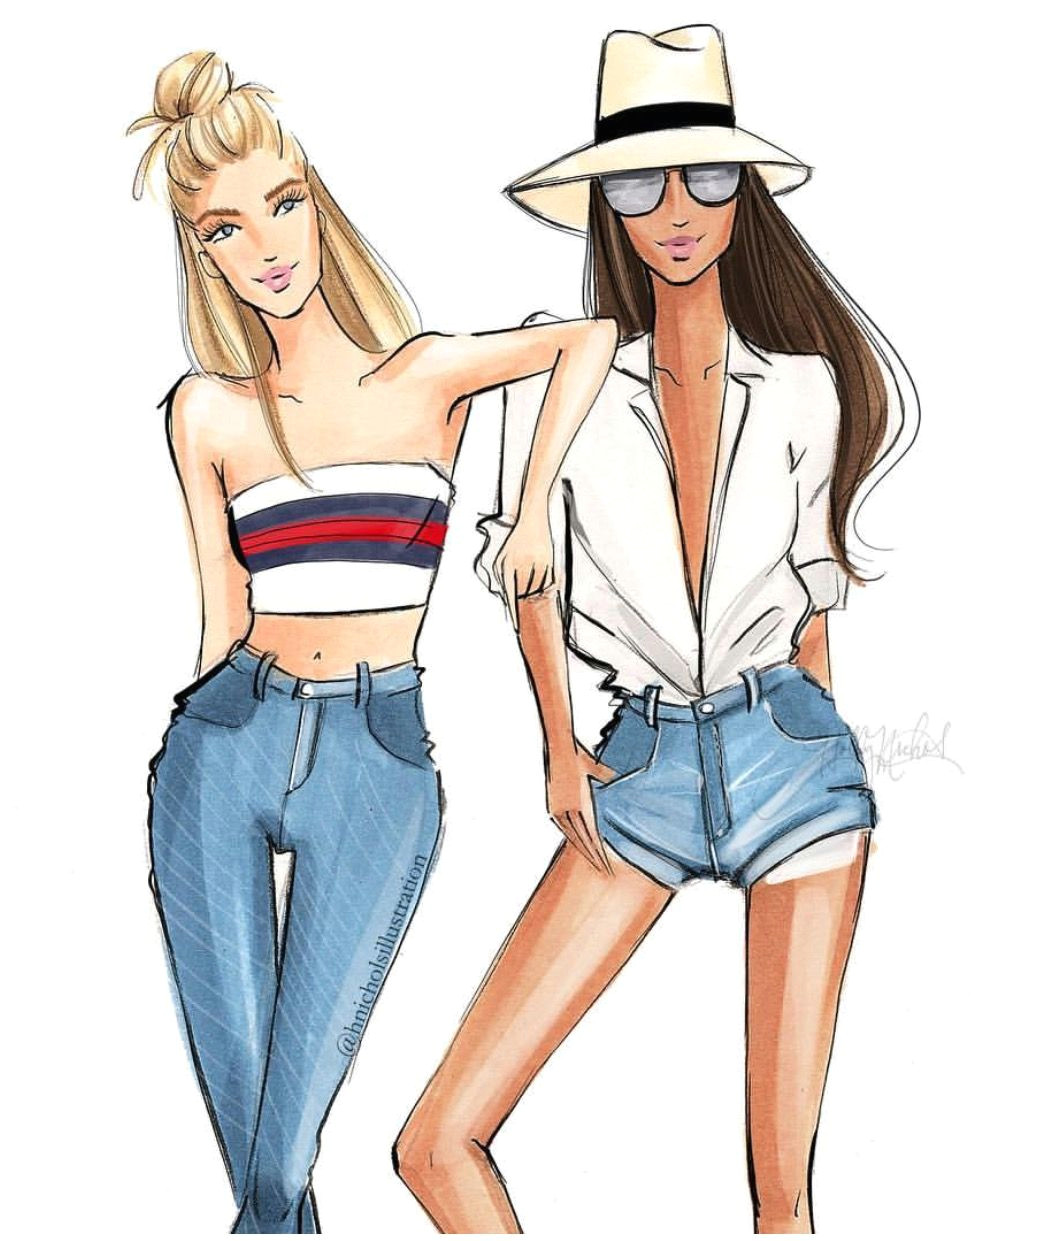 coastal cool fashionillustrations hnicholsillustration hnillustration etsy com be inspirational a mz manerz being well dressed is a beautiful form